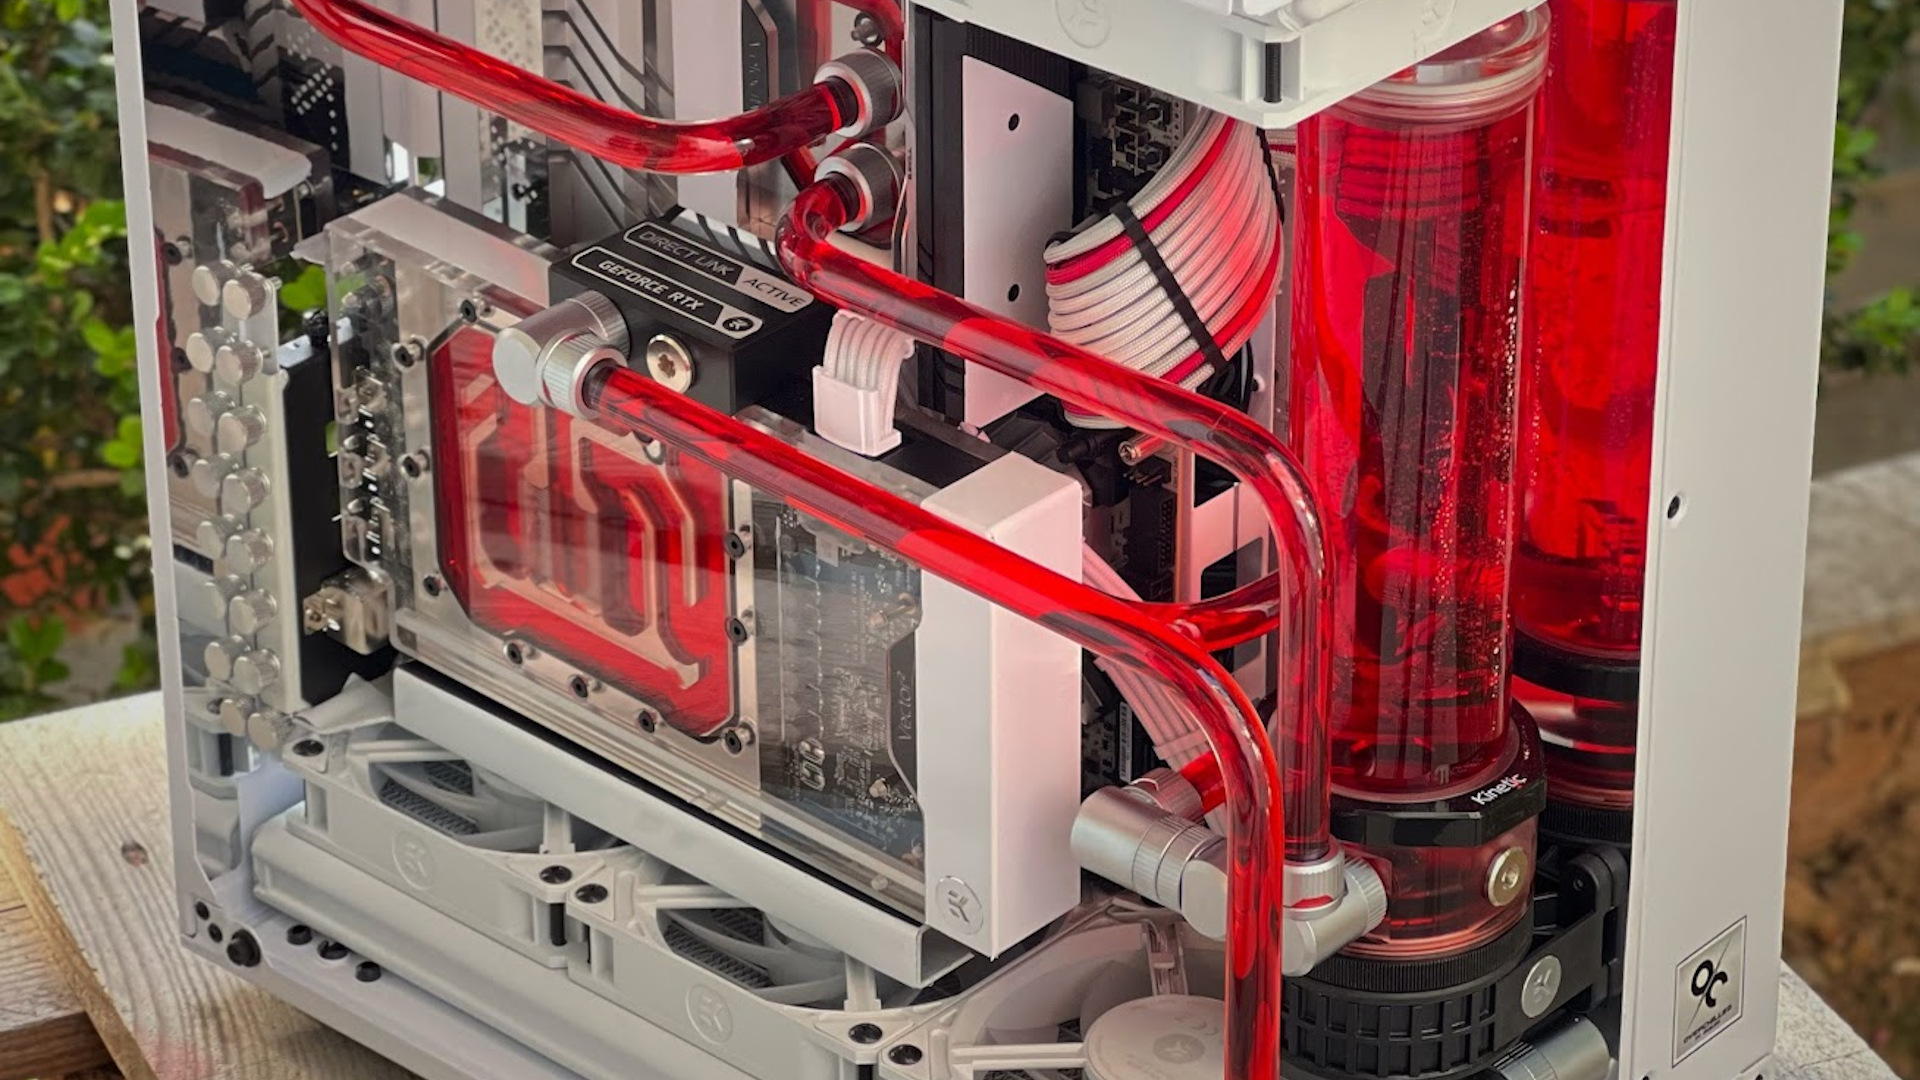 A closer look at the red tubing in this white and red watercooled PC